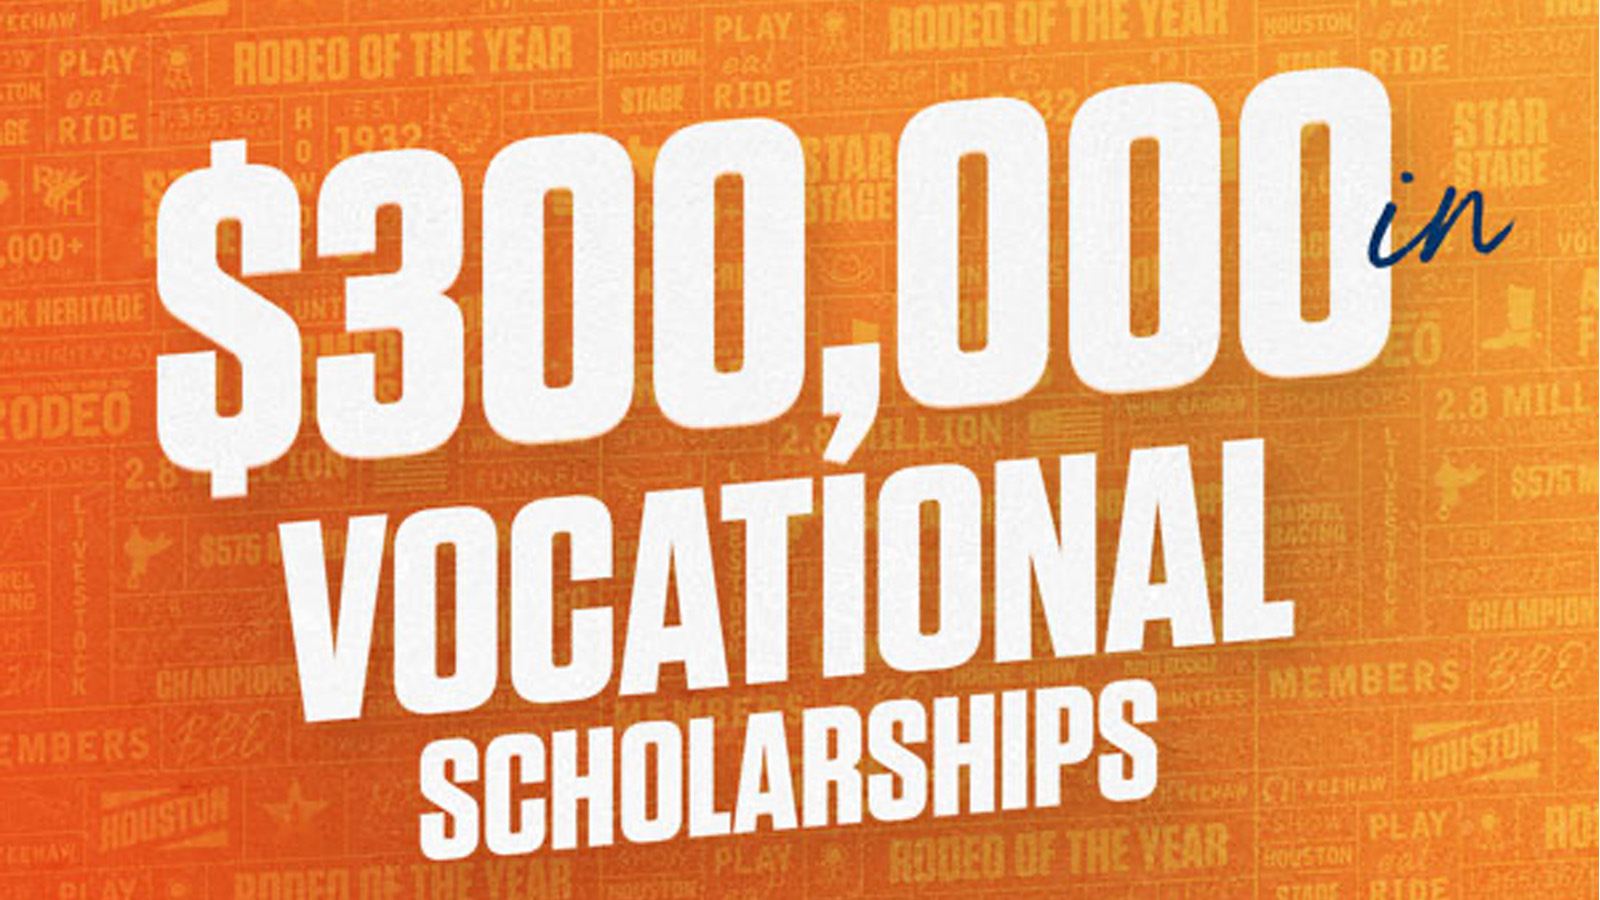 The Rodeo awards Houston-area technical schools with $300,000 in vocational scholarships